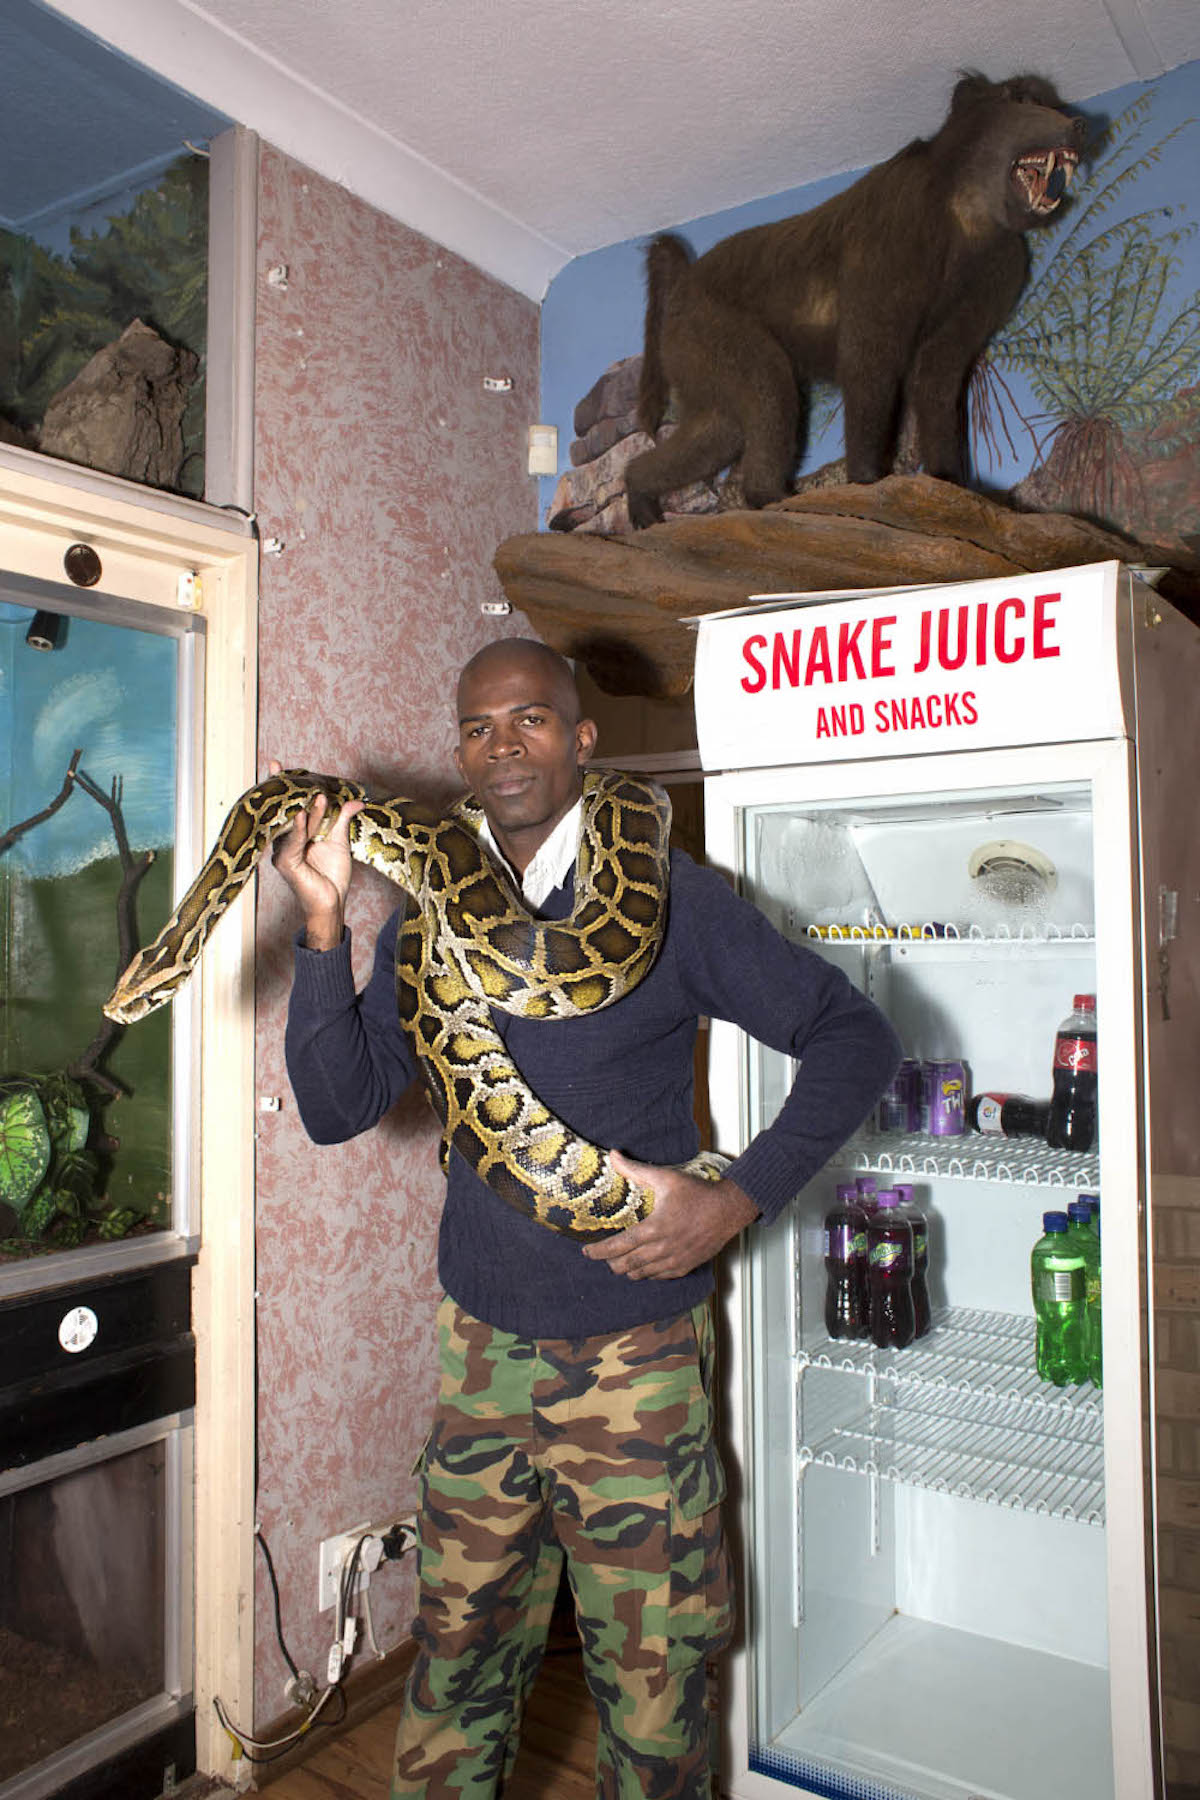 Giya Makondo-Wills, “They Came From The Water While The World Watched” – bald man wearing a blue jumper and military pants with a large snake wrapped around their neck and torso, standing in front of a refrigerator with a sign reading 